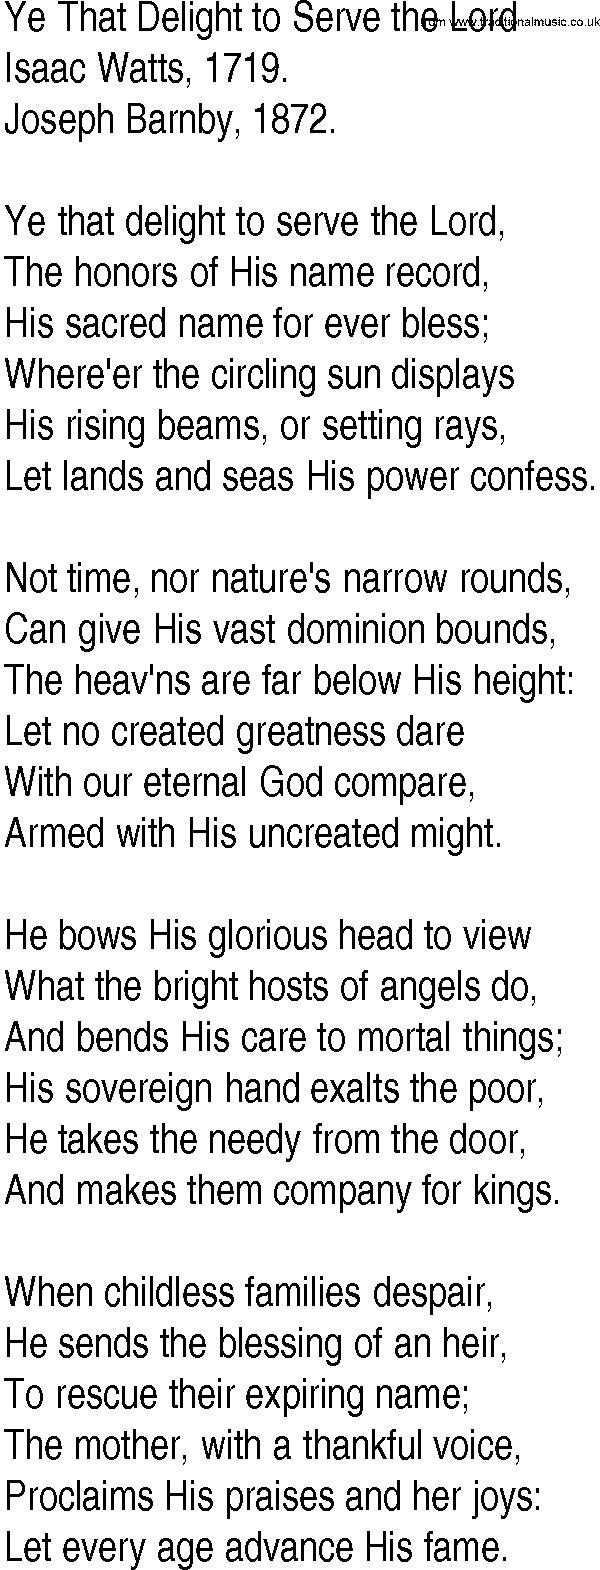 Hymn and Gospel Song: Ye That Delight to Serve the Lord by Isaac Watts lyrics